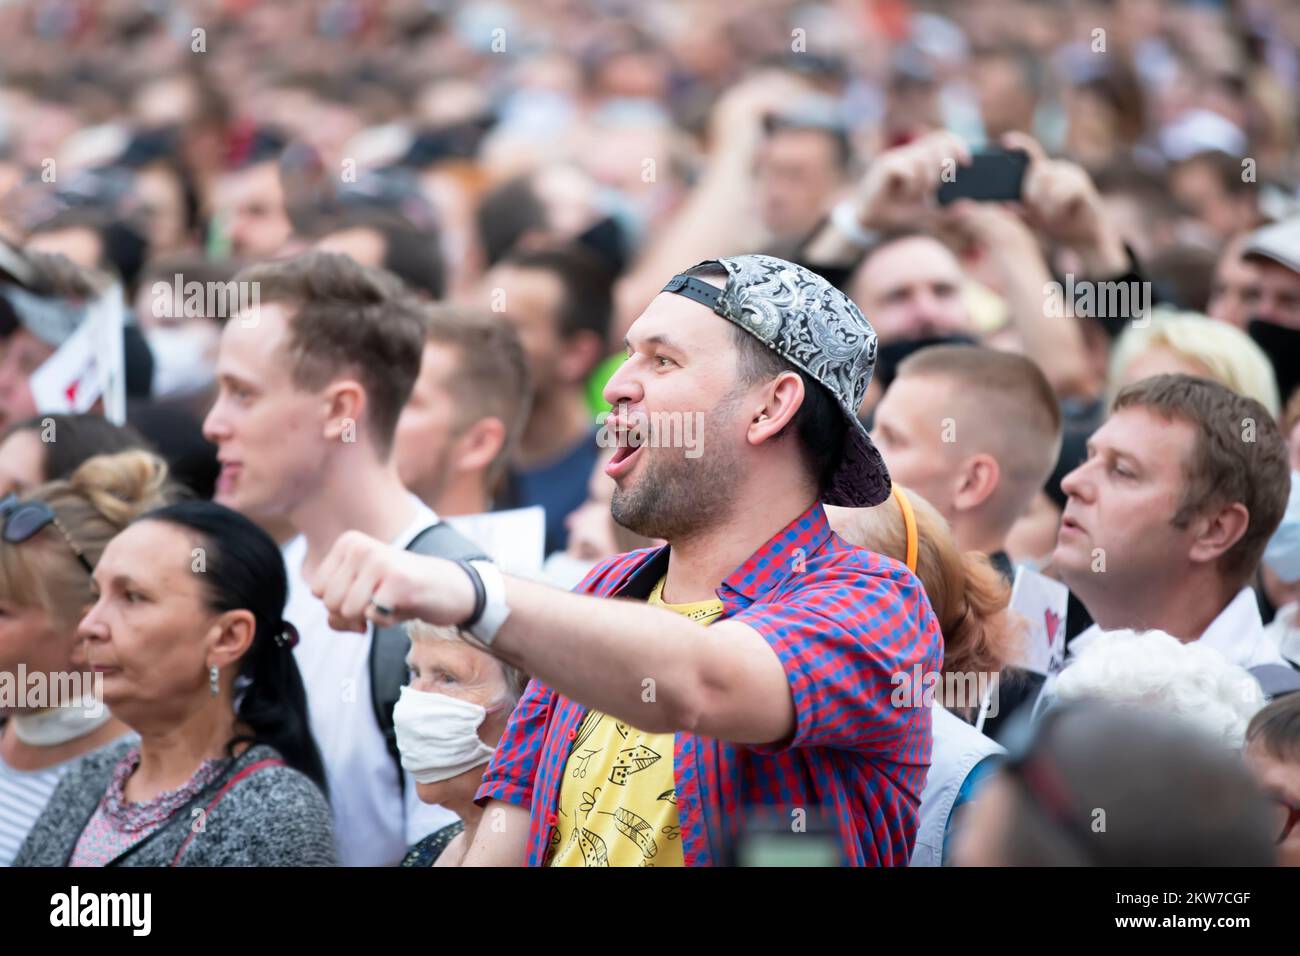 Belarus, city of Gomil, July 26, 2020. A group of people at a protest. A man shouts slogans, protests against the current government. A group of demon Stock Photo